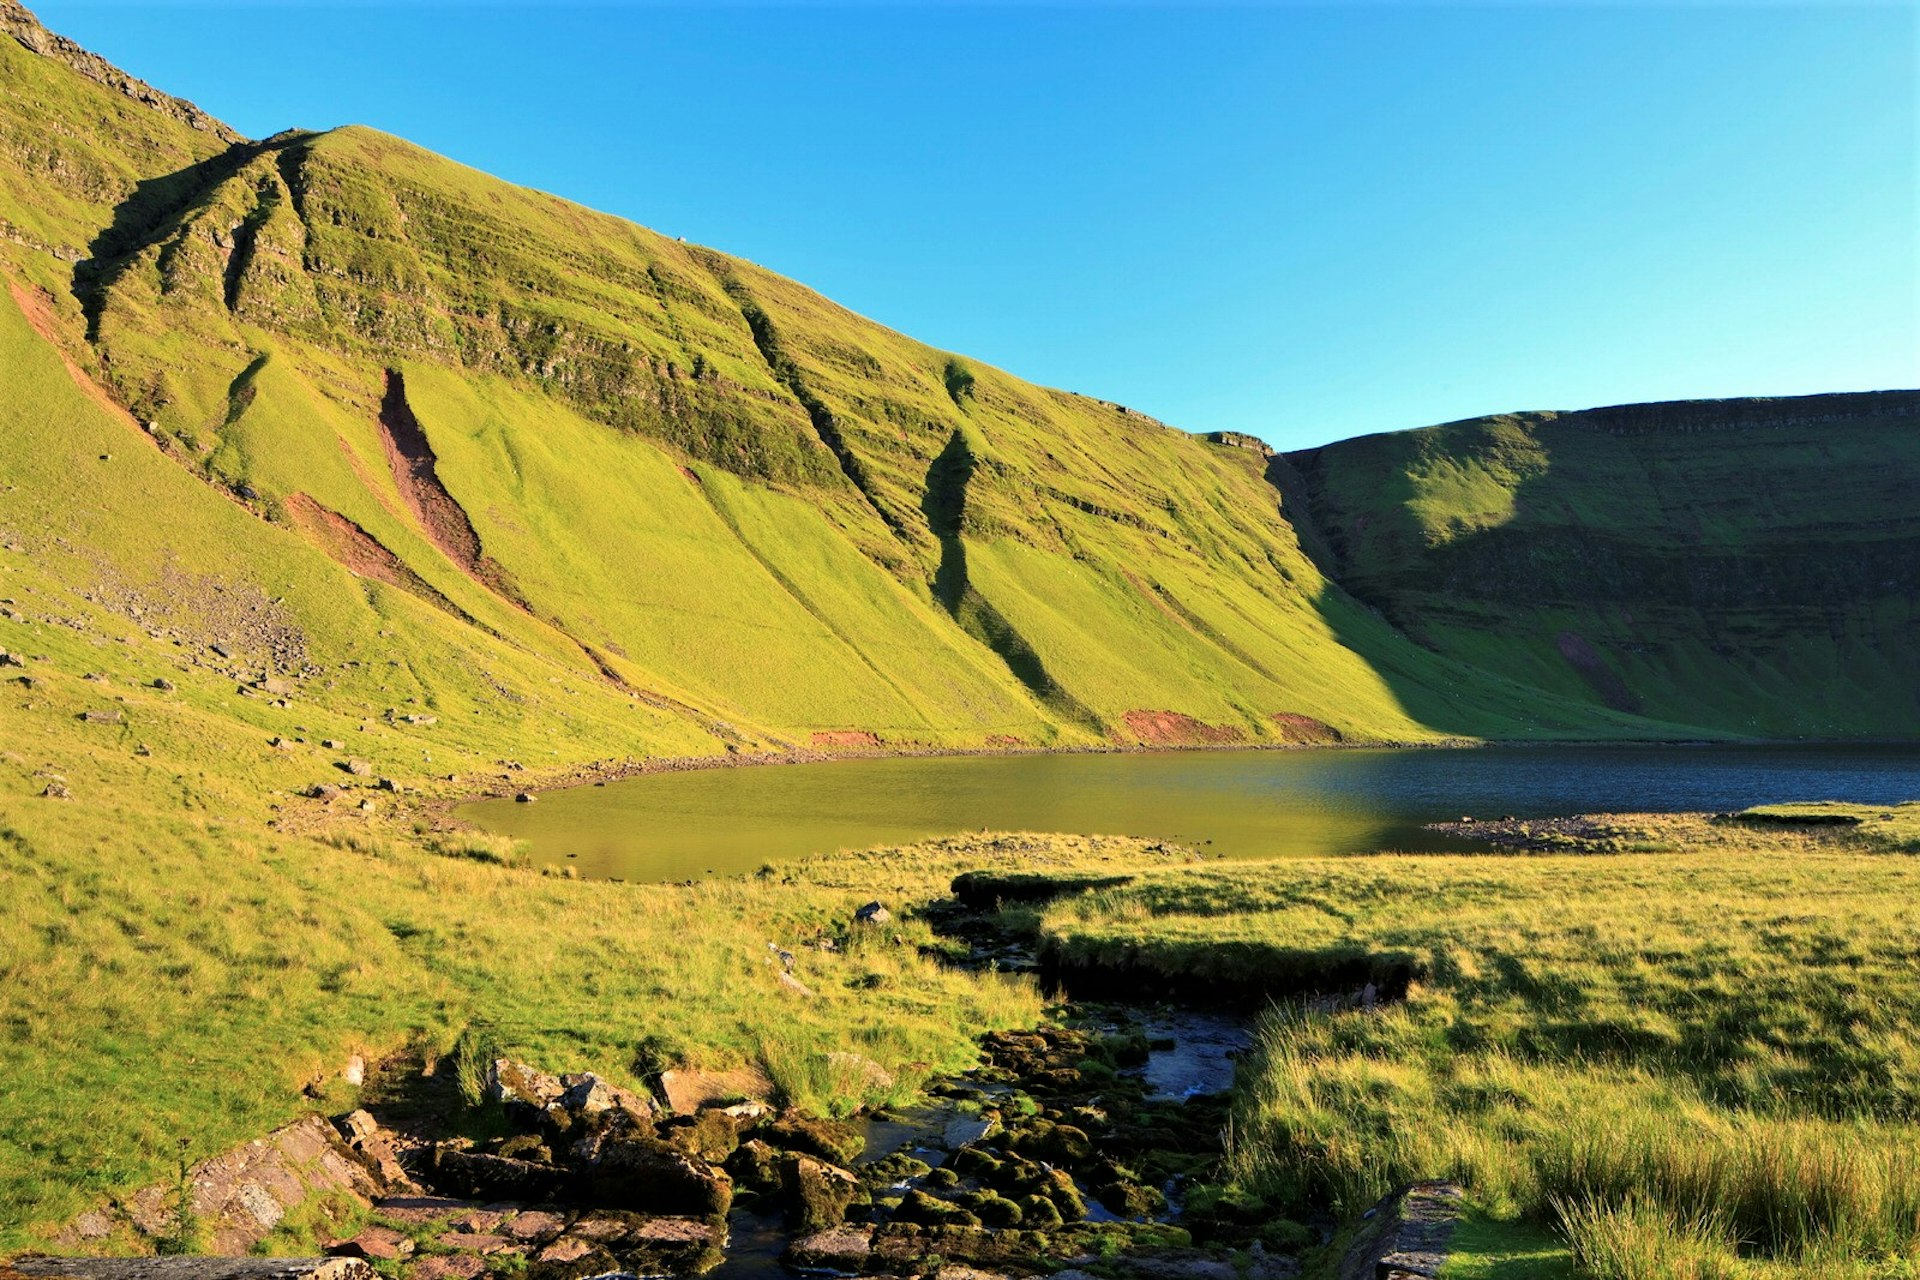 The glacial lake of Llyn y Fan Fach in the sunshine © Loop Images / UIG via Getty Images